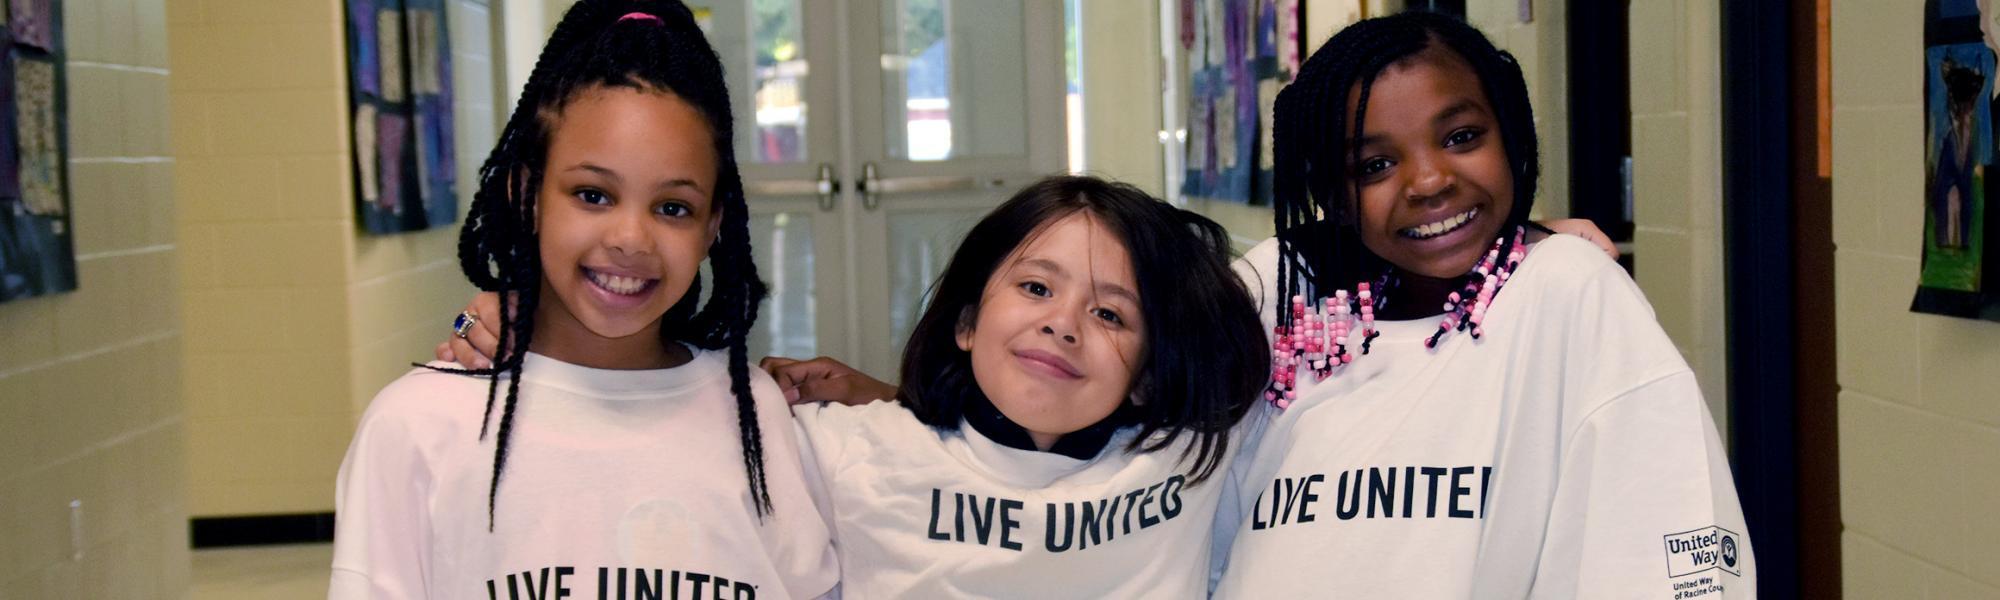 Three kids in the hall of Knapp Elementary wearing oversized Live United shirts wrap their arms around each other's shoulders and strike cool poses for the camera.